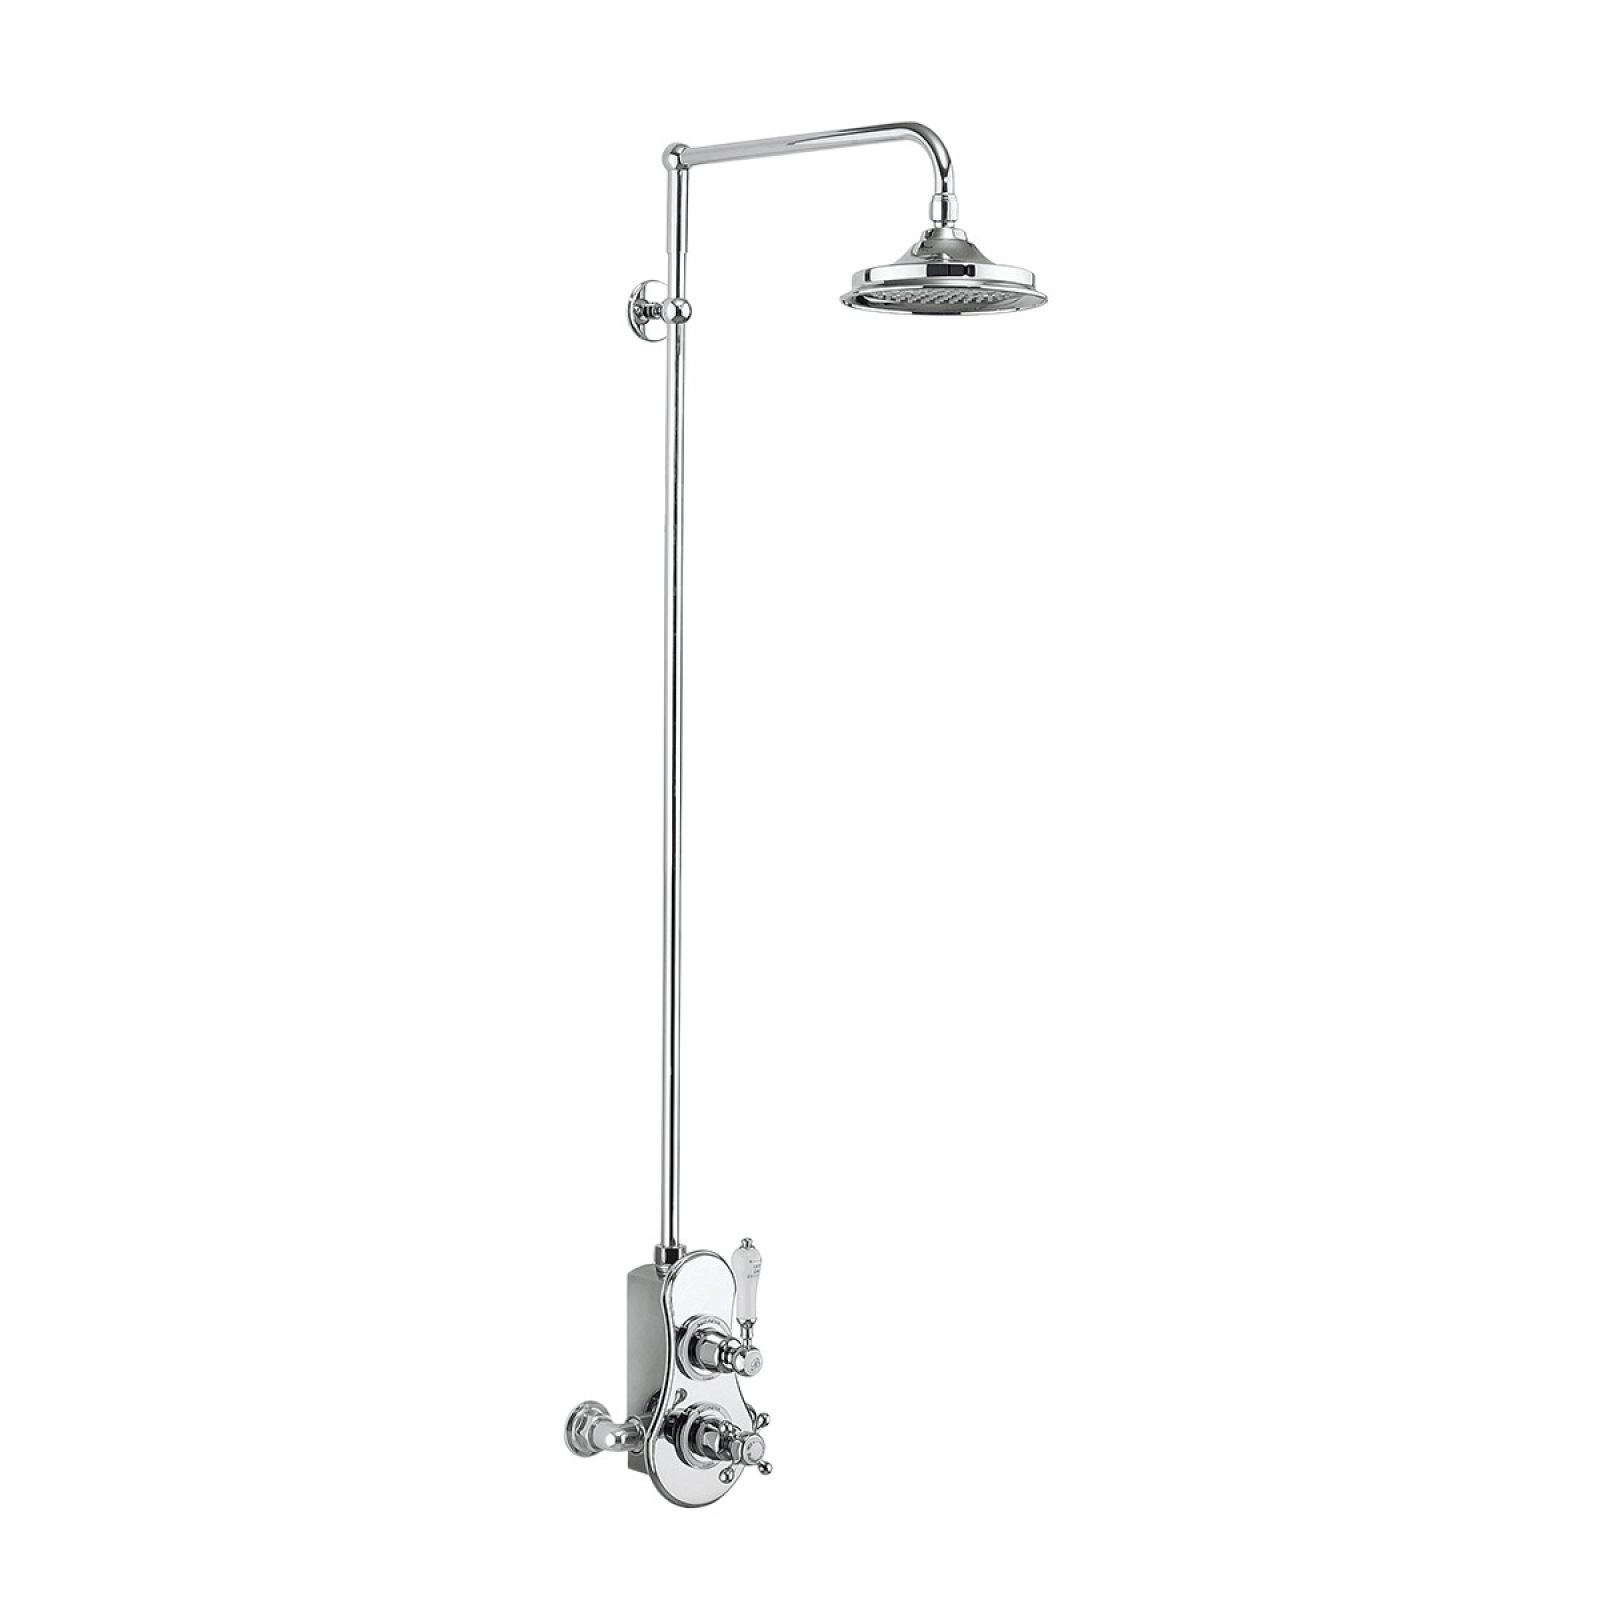 Speyside Thermostatic Exposed Shower Valve Single Outlet with Rigid Riser and Swivel Shower Arm